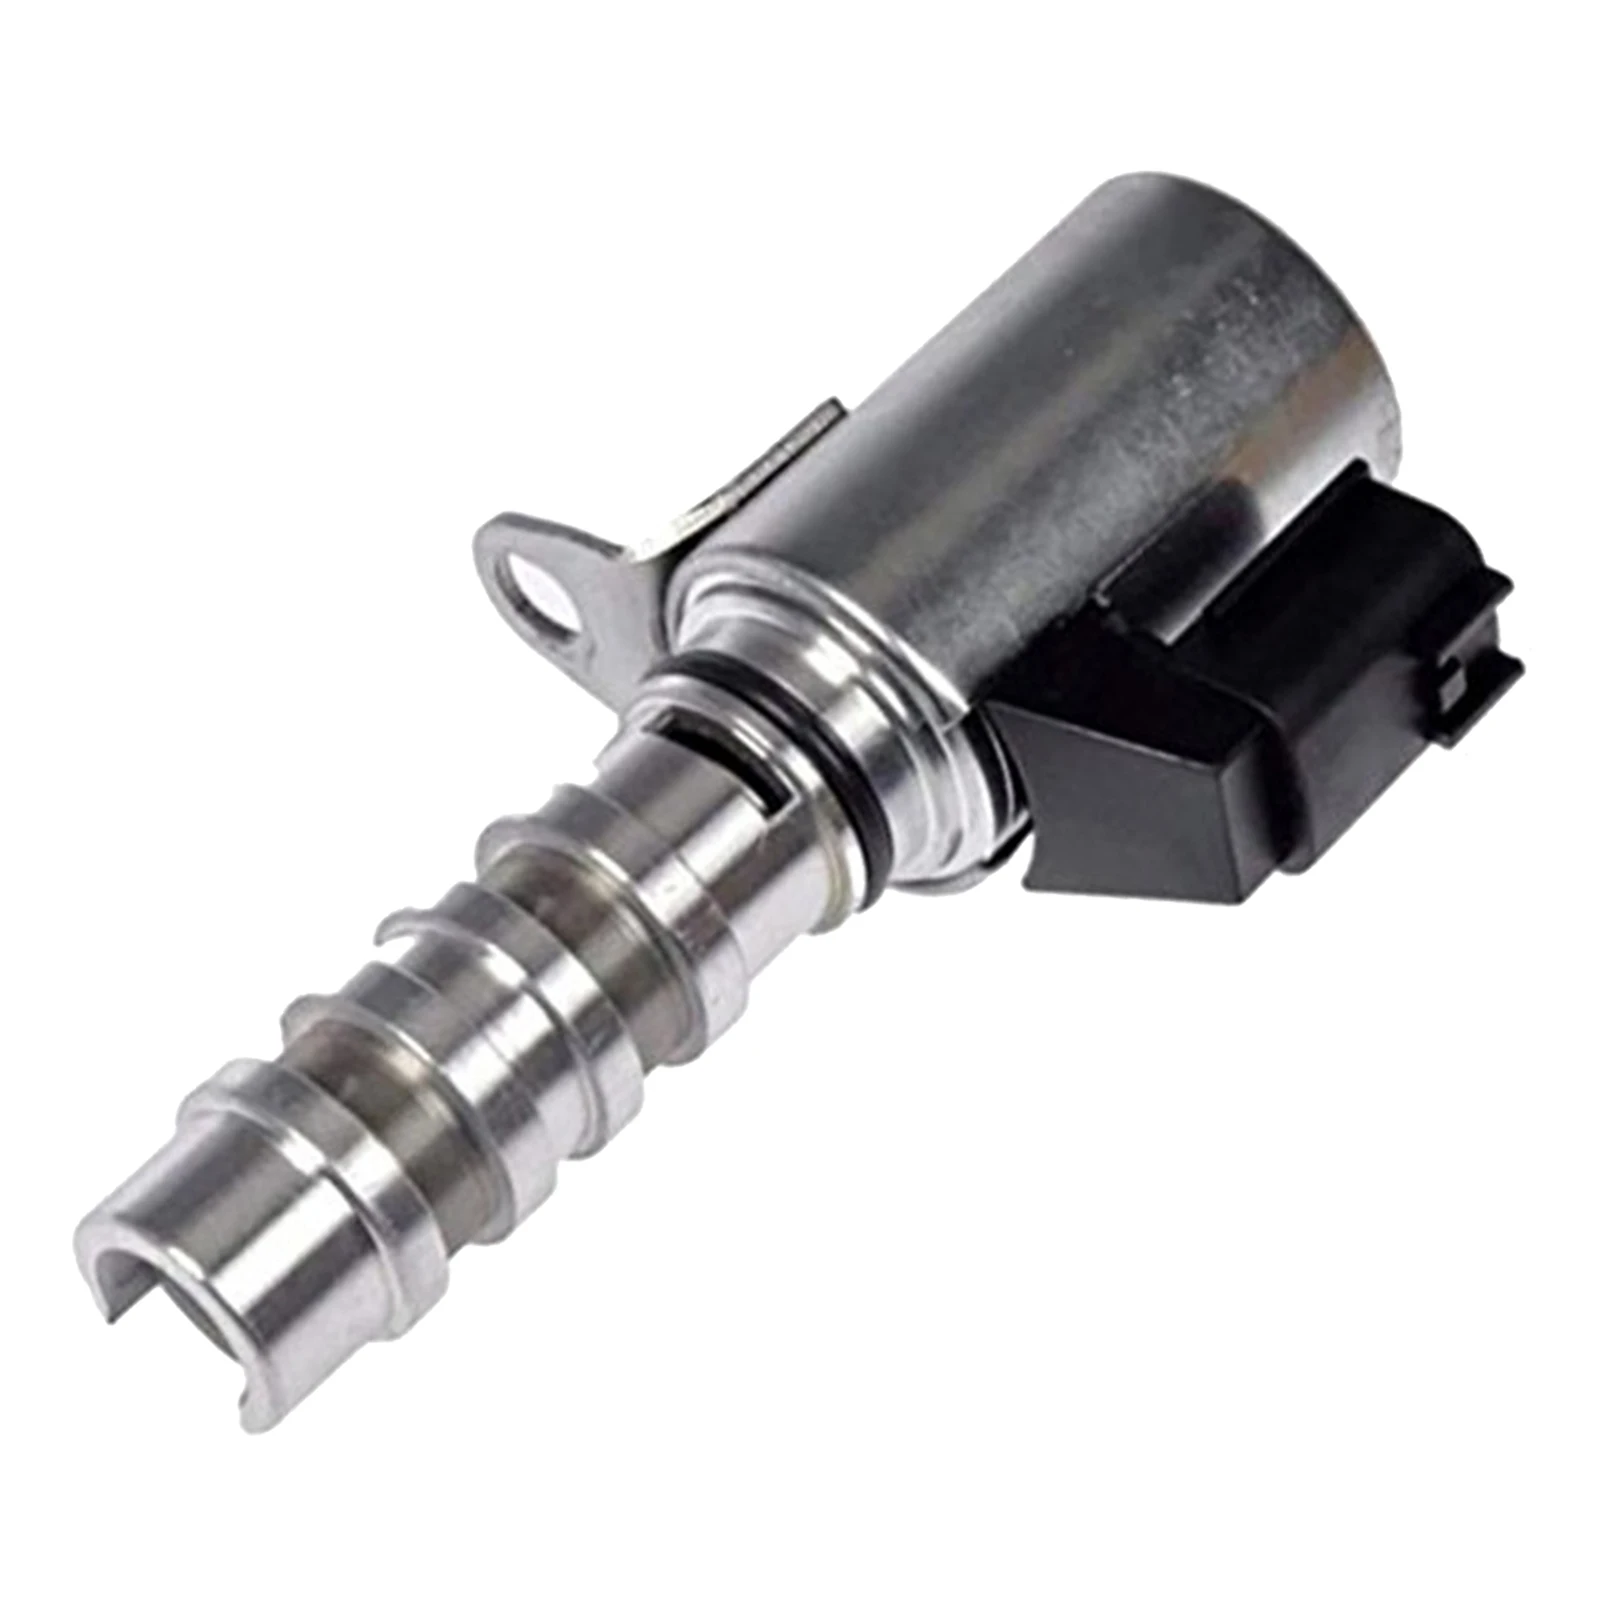 Durable VVT Engine Camshaft Variable Oil Control Valve Timing Control Solenoid,